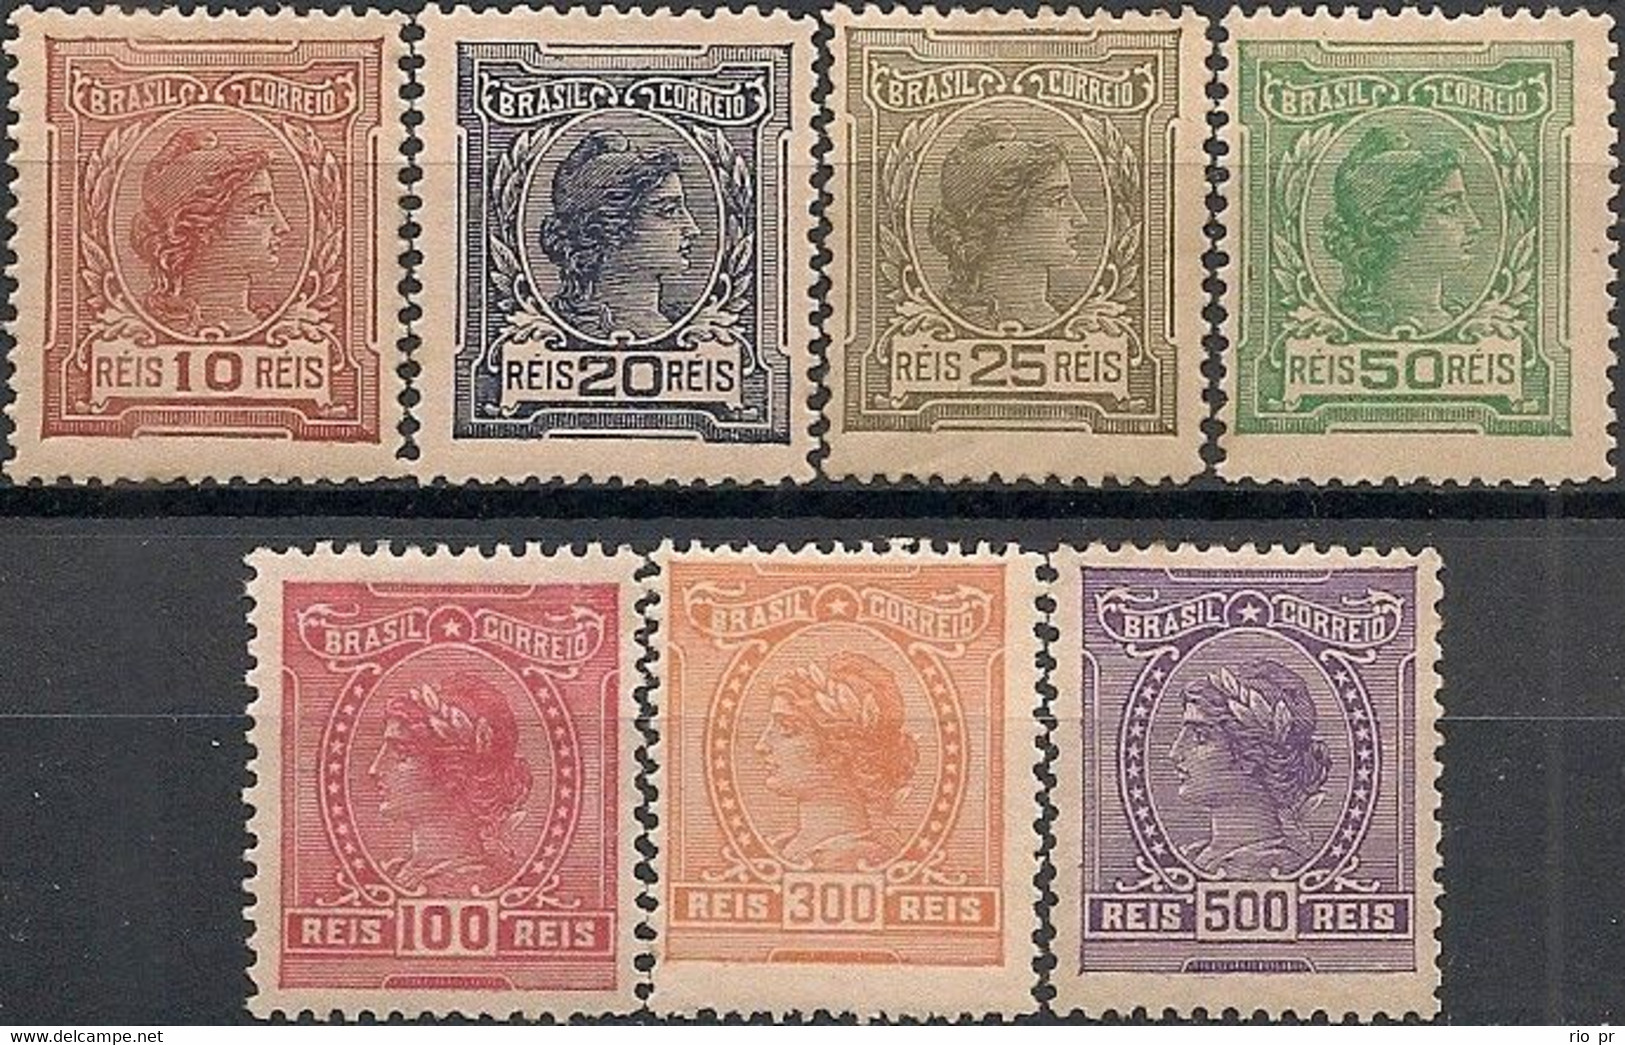 BRAZIL - COMPLETE SET DEFINITIVES: ALLEGORY OF THE REPUBLIC, No Watermark 1918/9 - MNH/MLH/MH - Neufs